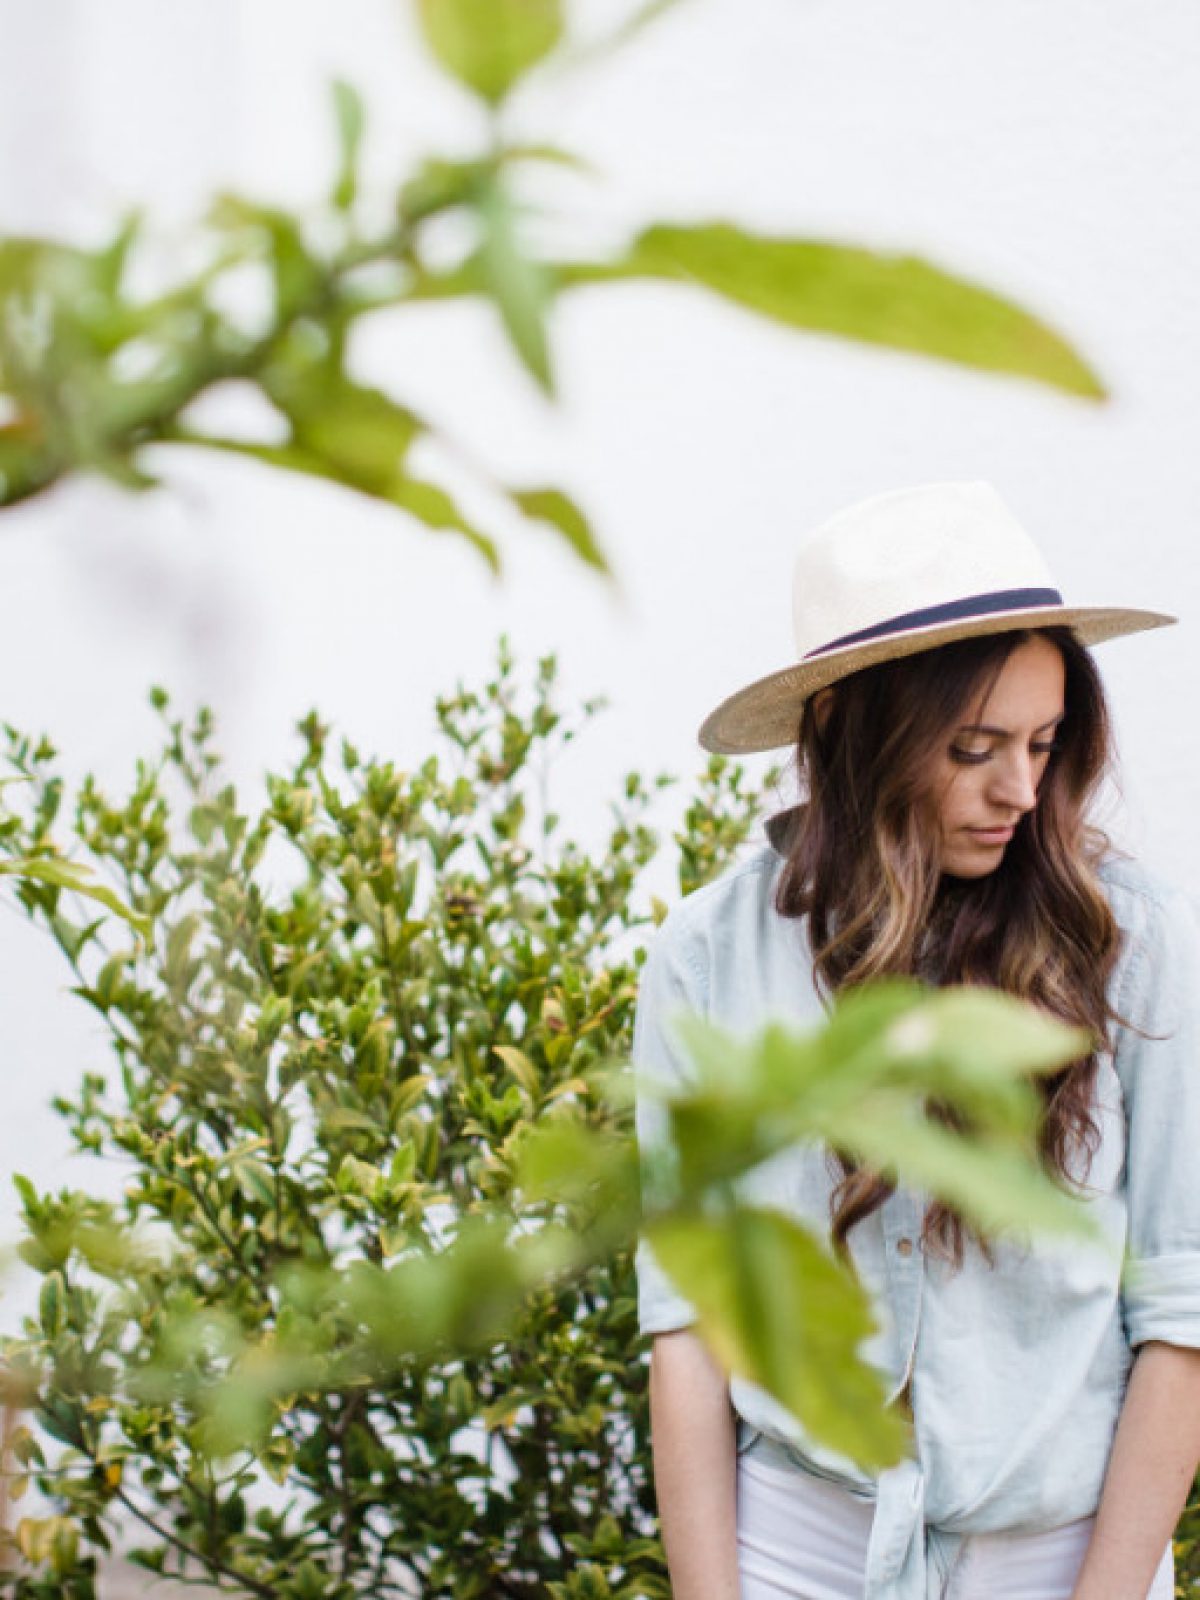 American Eagle, casual spring outfit ideas, chambray top and white jeans, champray top, j crew panama hat, jcrew panama hat, spring style, white denim, white jeans, santa monica, california, j.crew panama hat